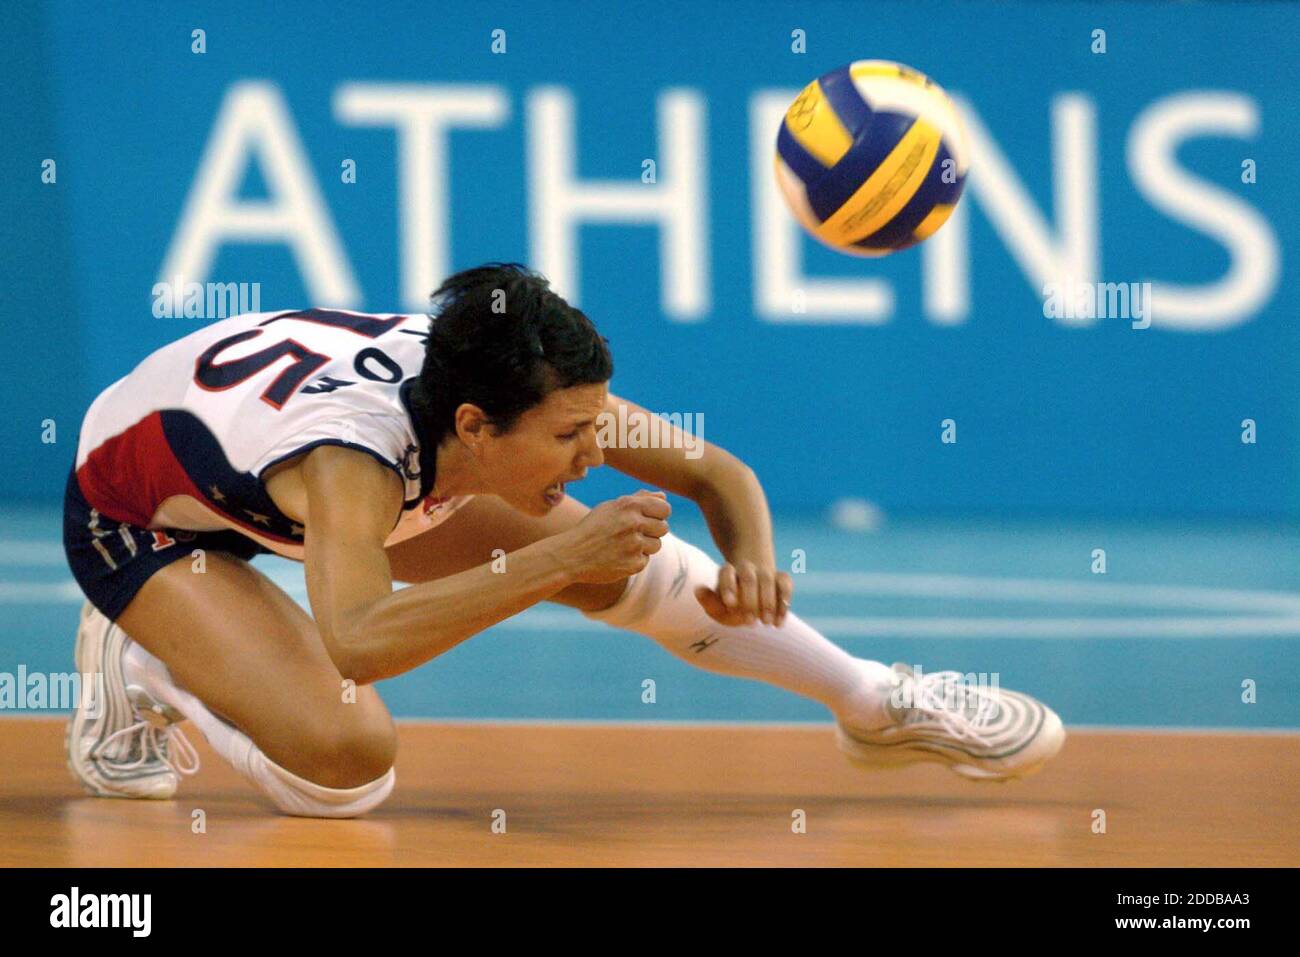 NO FILM, NO VIDEO, NO TV, NO DOCUMENTARY - Logan Tom of the United States can't make a dig as the American fall to the Dominican Republic in the volleyball competition at the 2004 Olympic Games on Wednesday, August 18, 2004. Photo by Karl Mondon/Contra Costa Times/KRT/ABACA Stock Photo